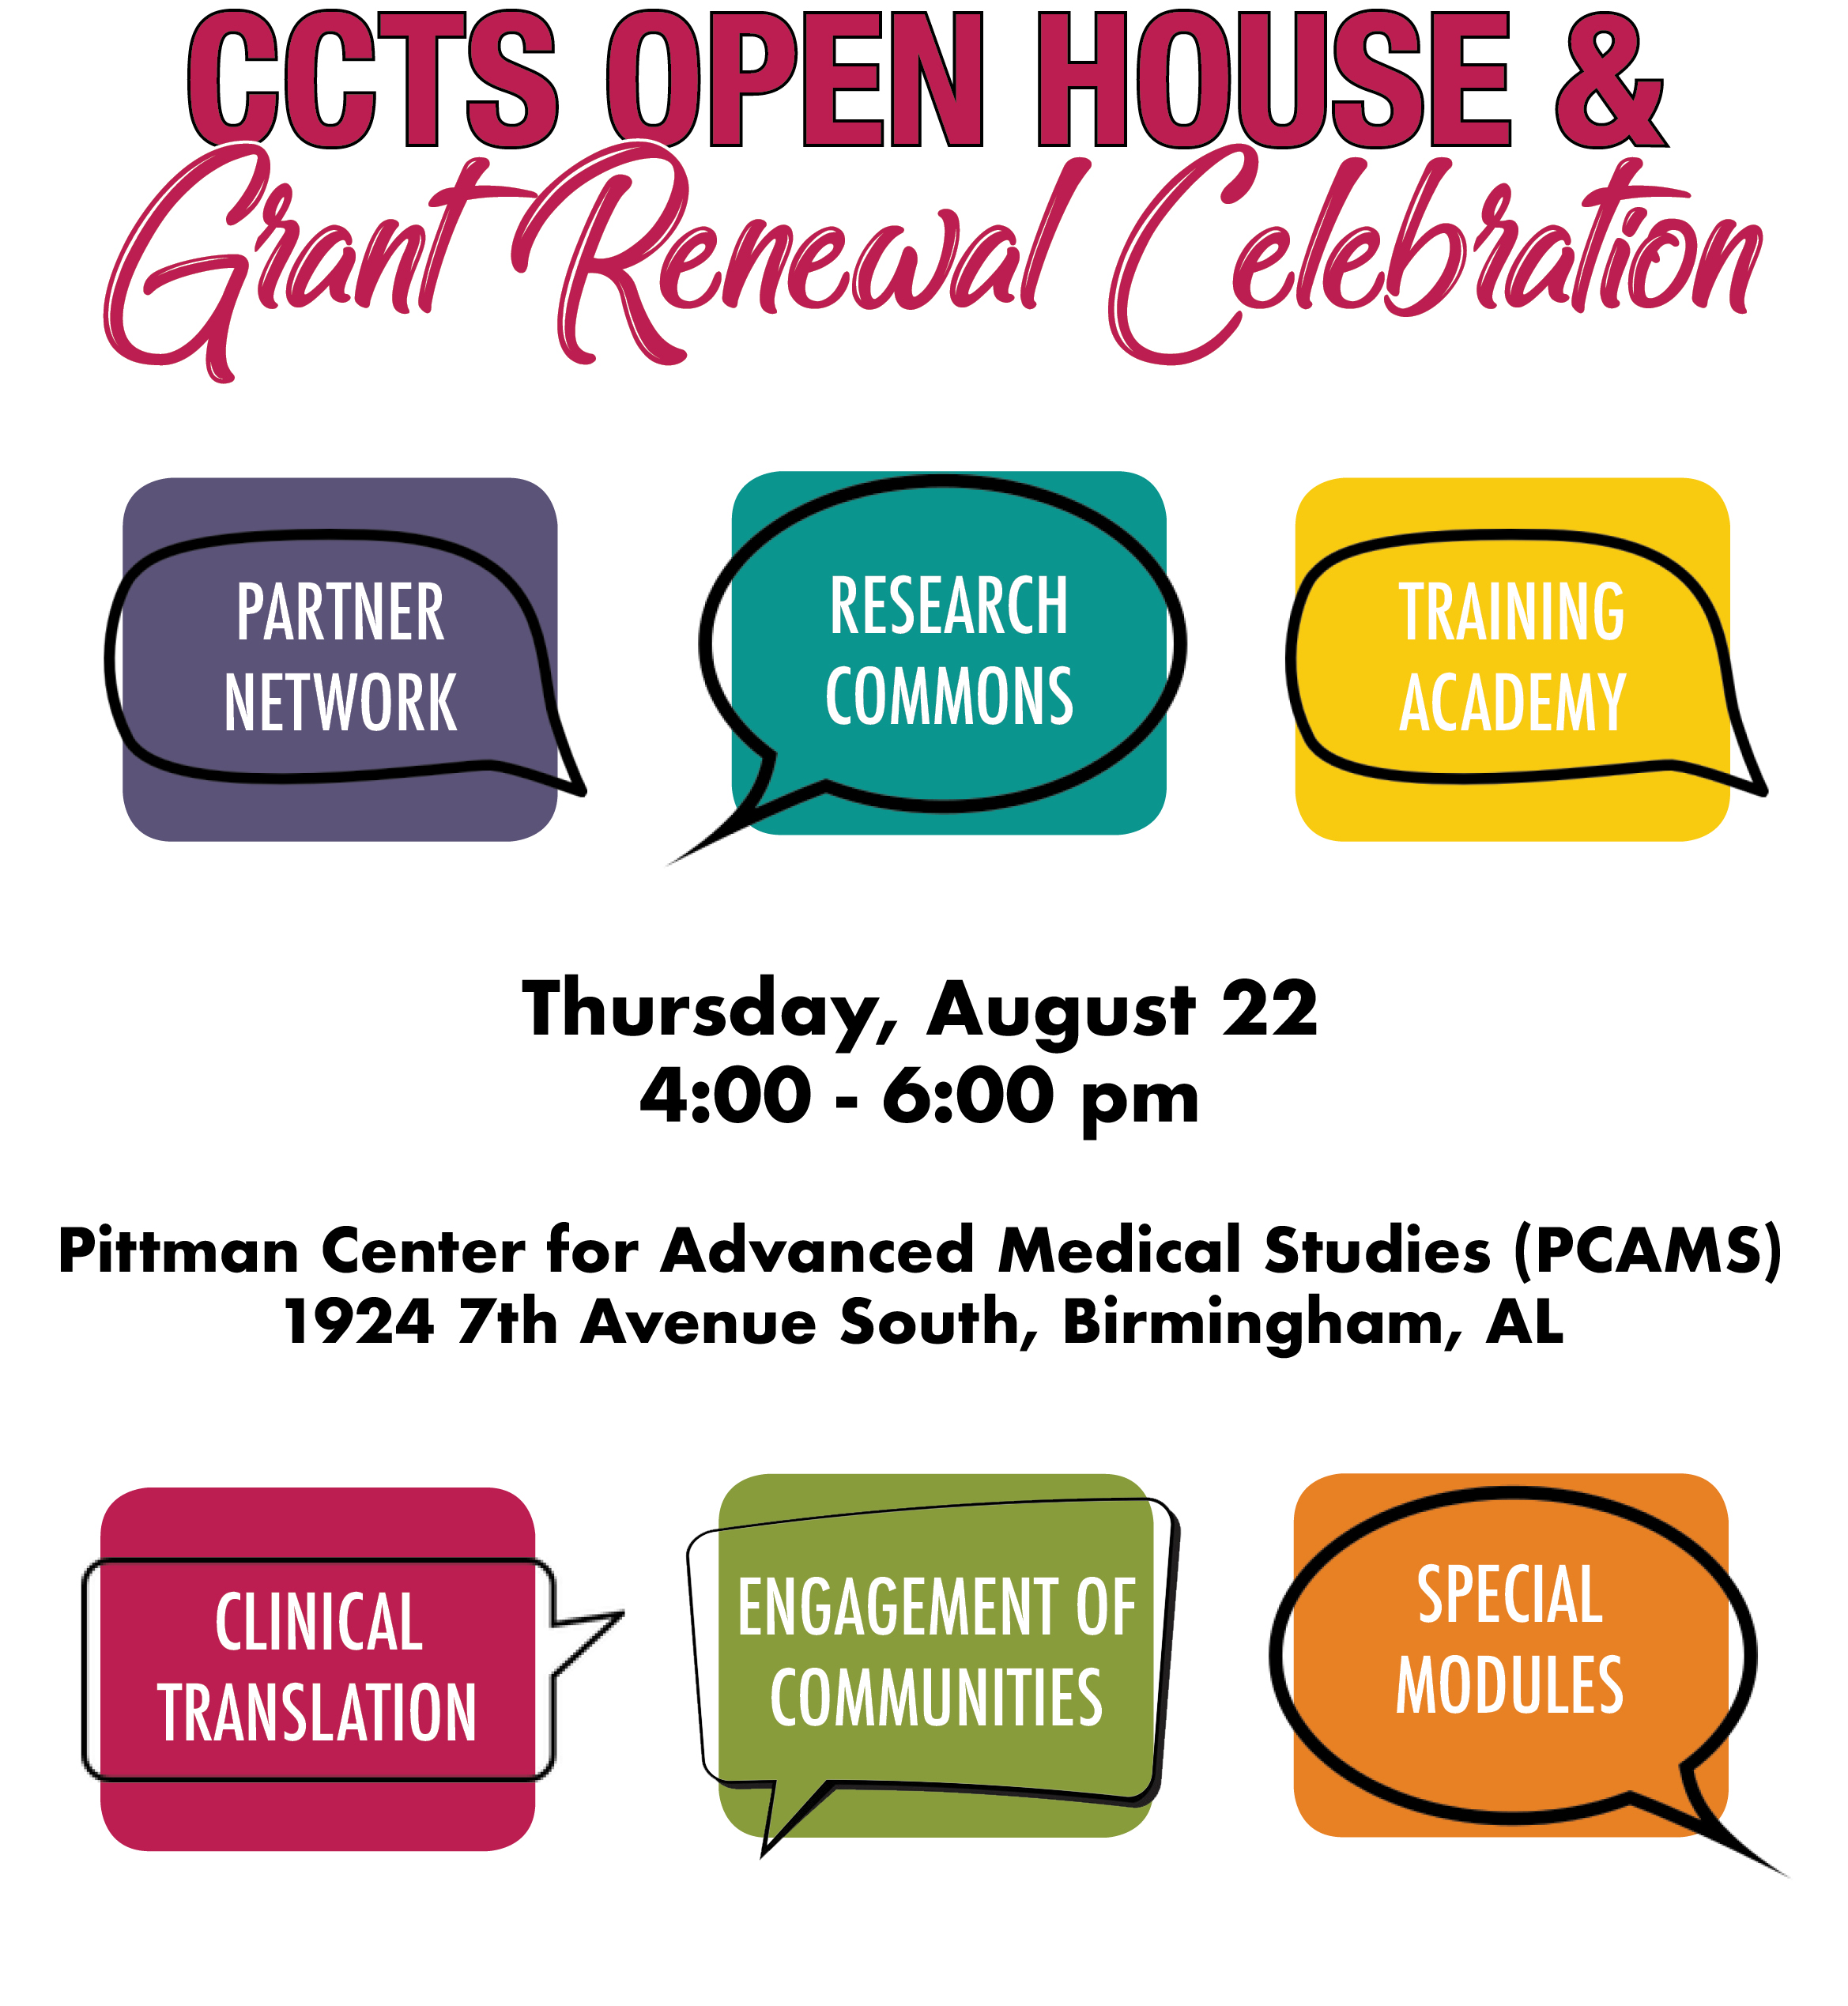 CCTS Open House & Grant Renewal Celebration